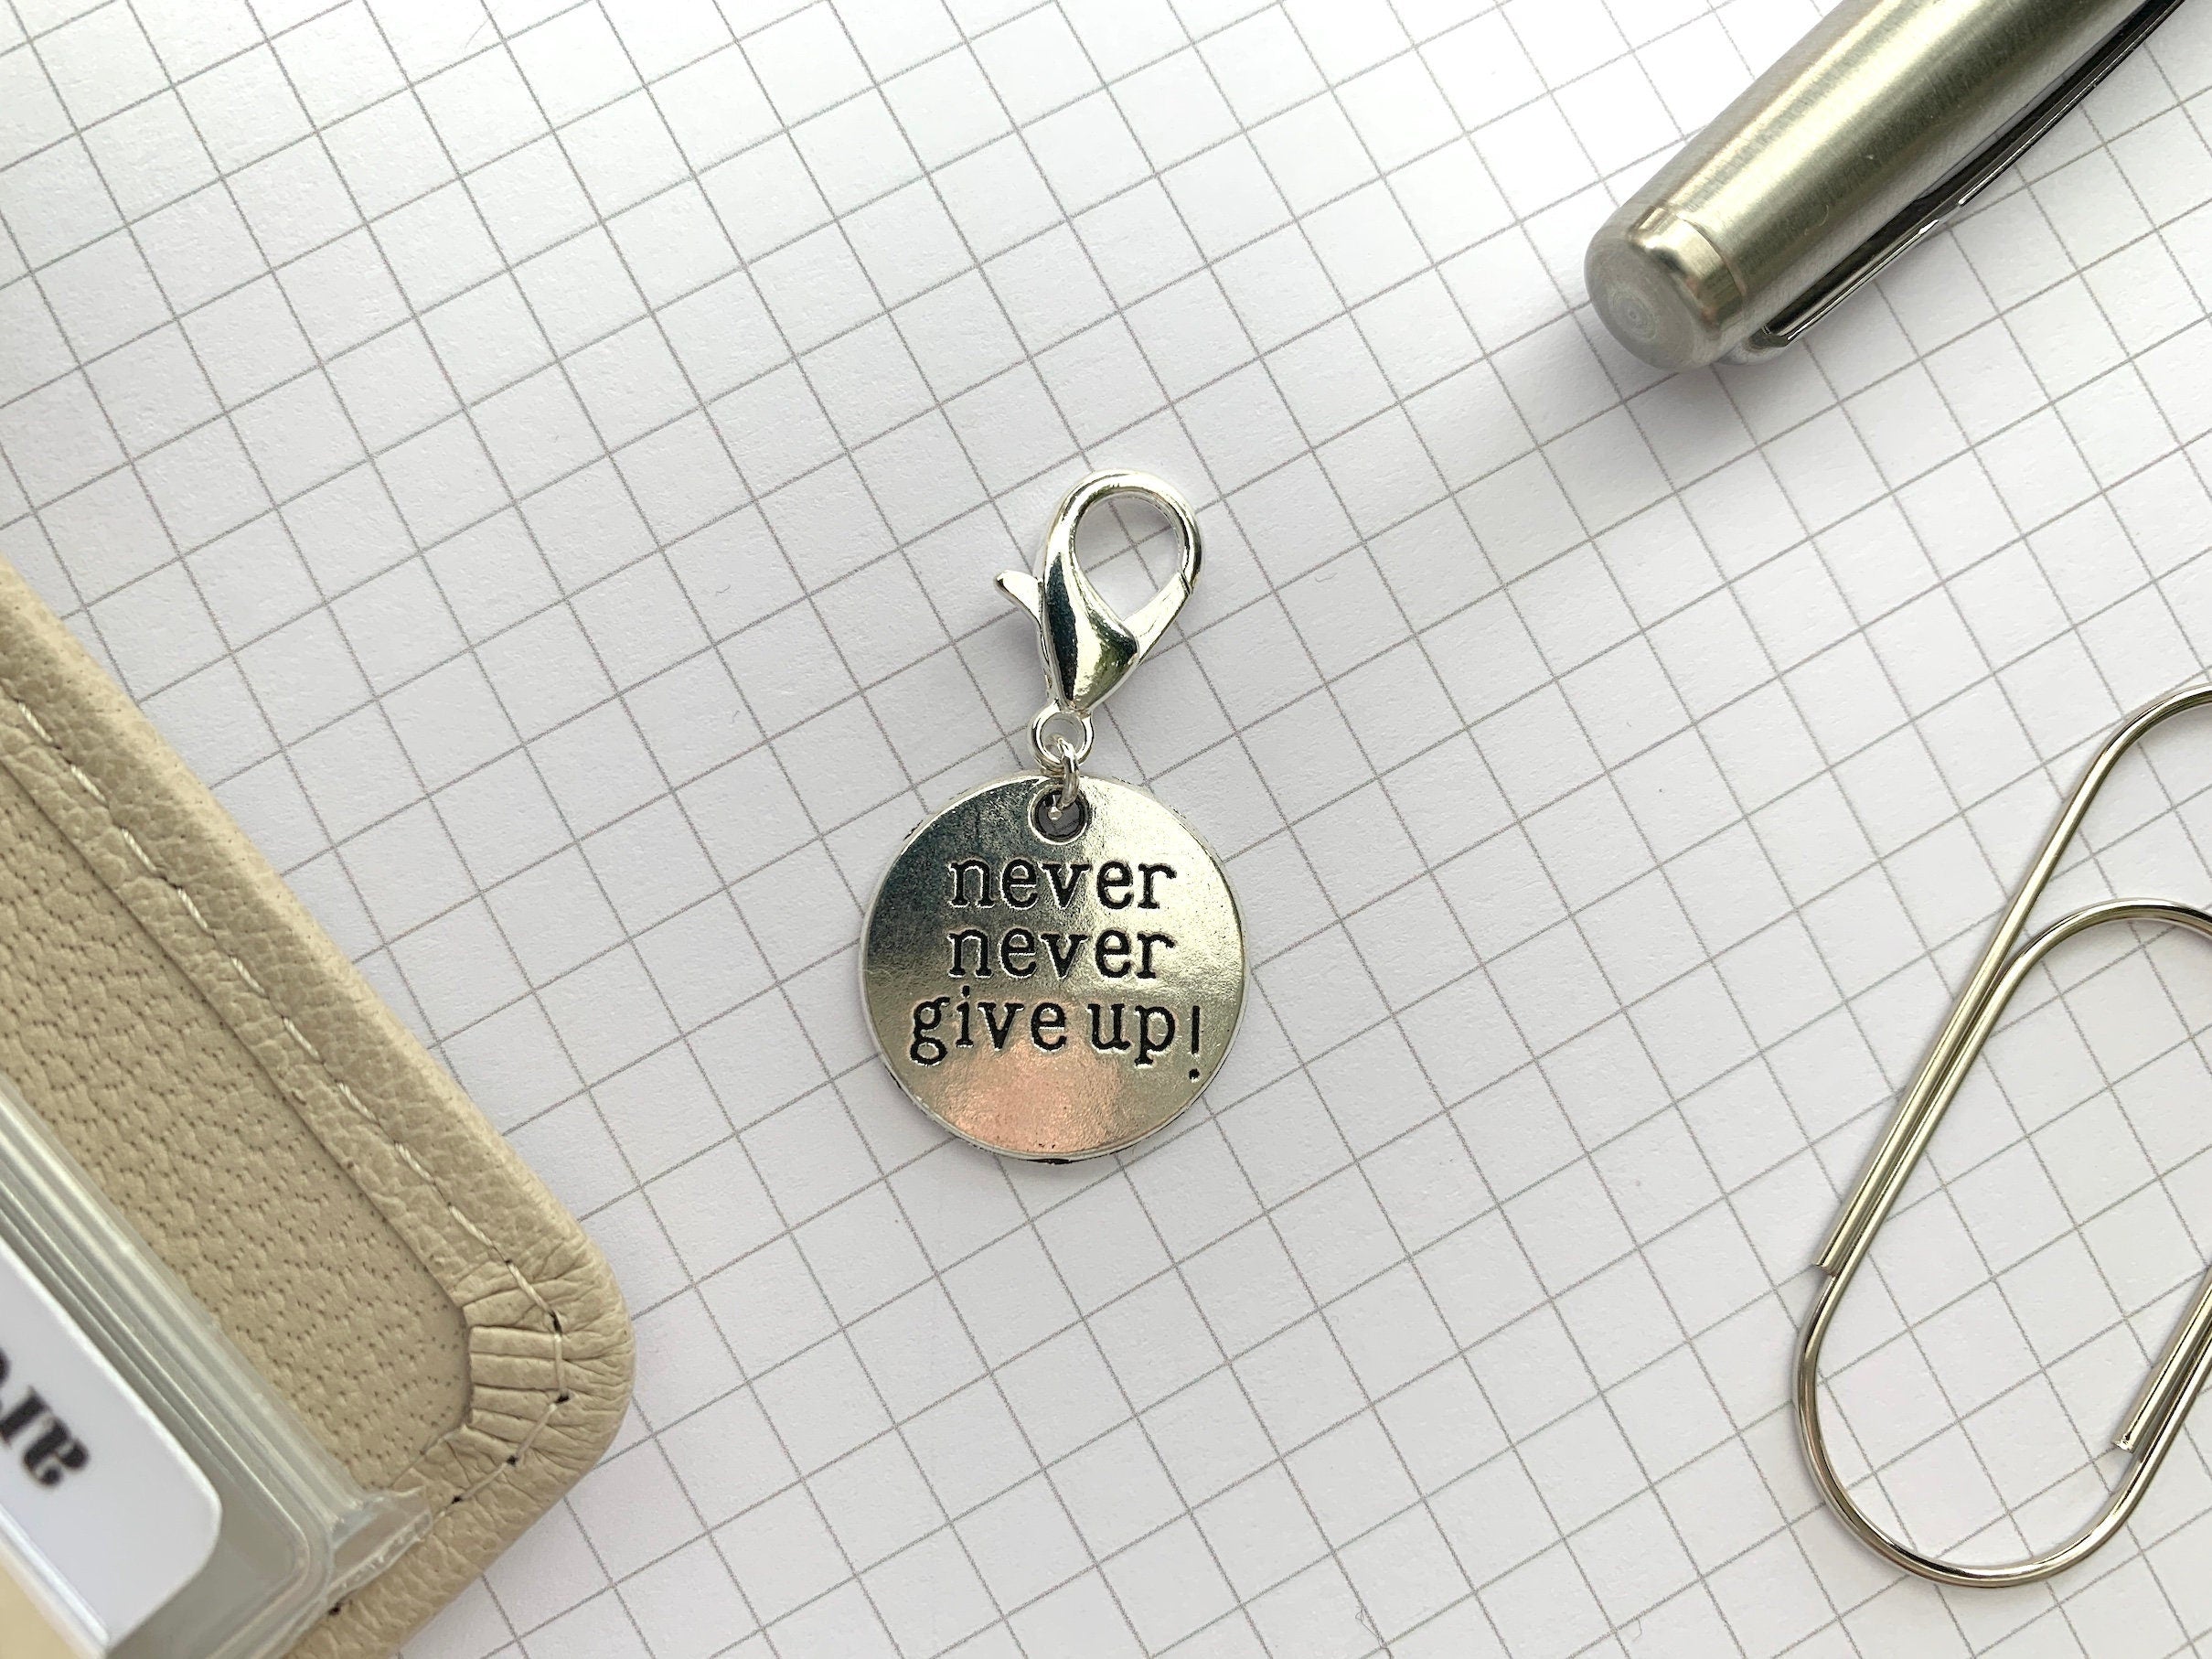 Never Never Give Up Zipper Pull - Planner Charm